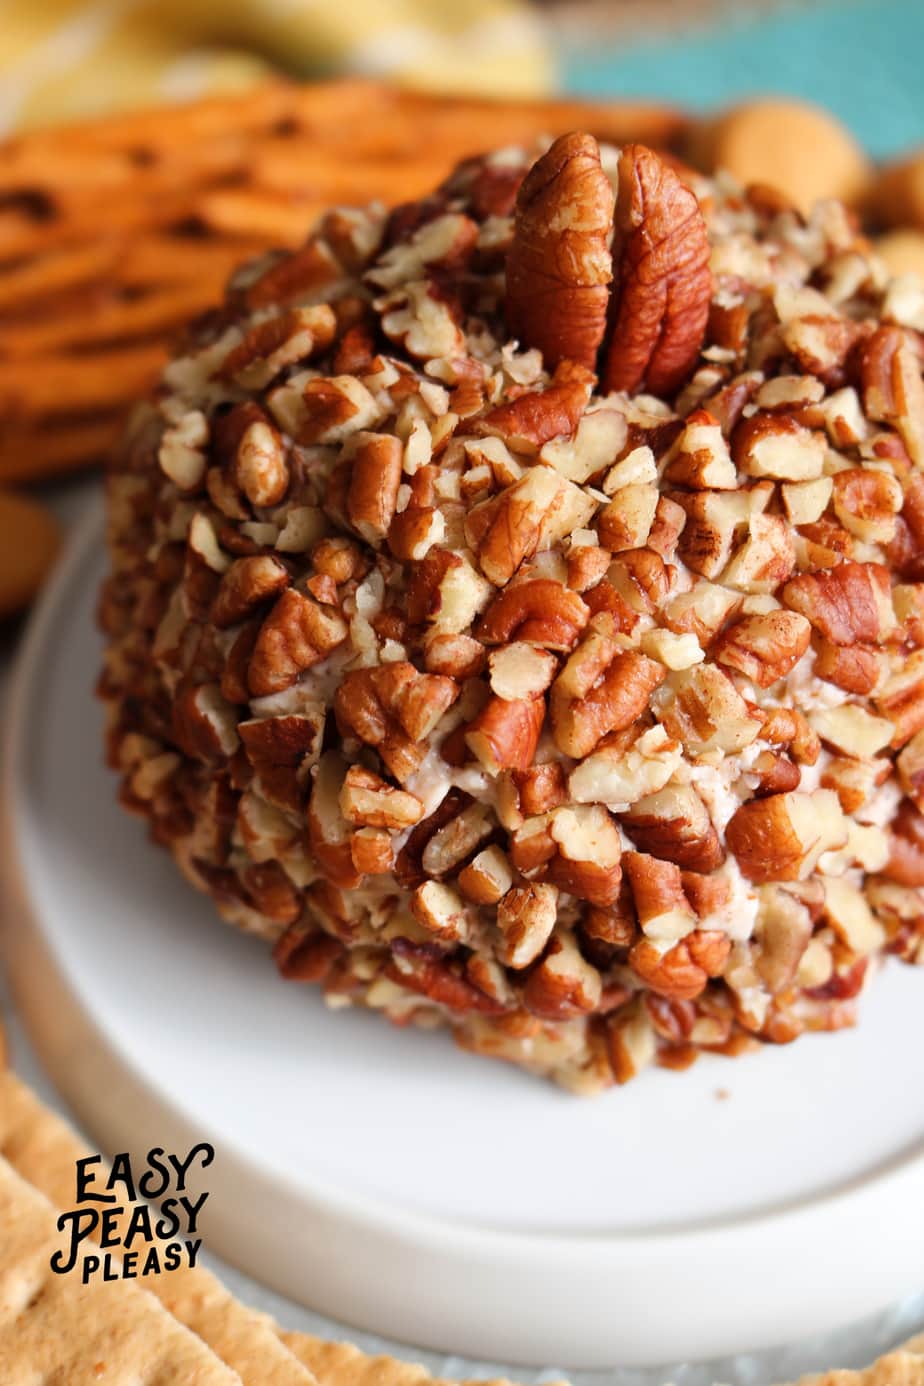 Pumpkin Spice Cheese Ball is the perfect appetizer for the Holidays. It's only 4 ingredients, freezer friendly, and perfect to make ahead.